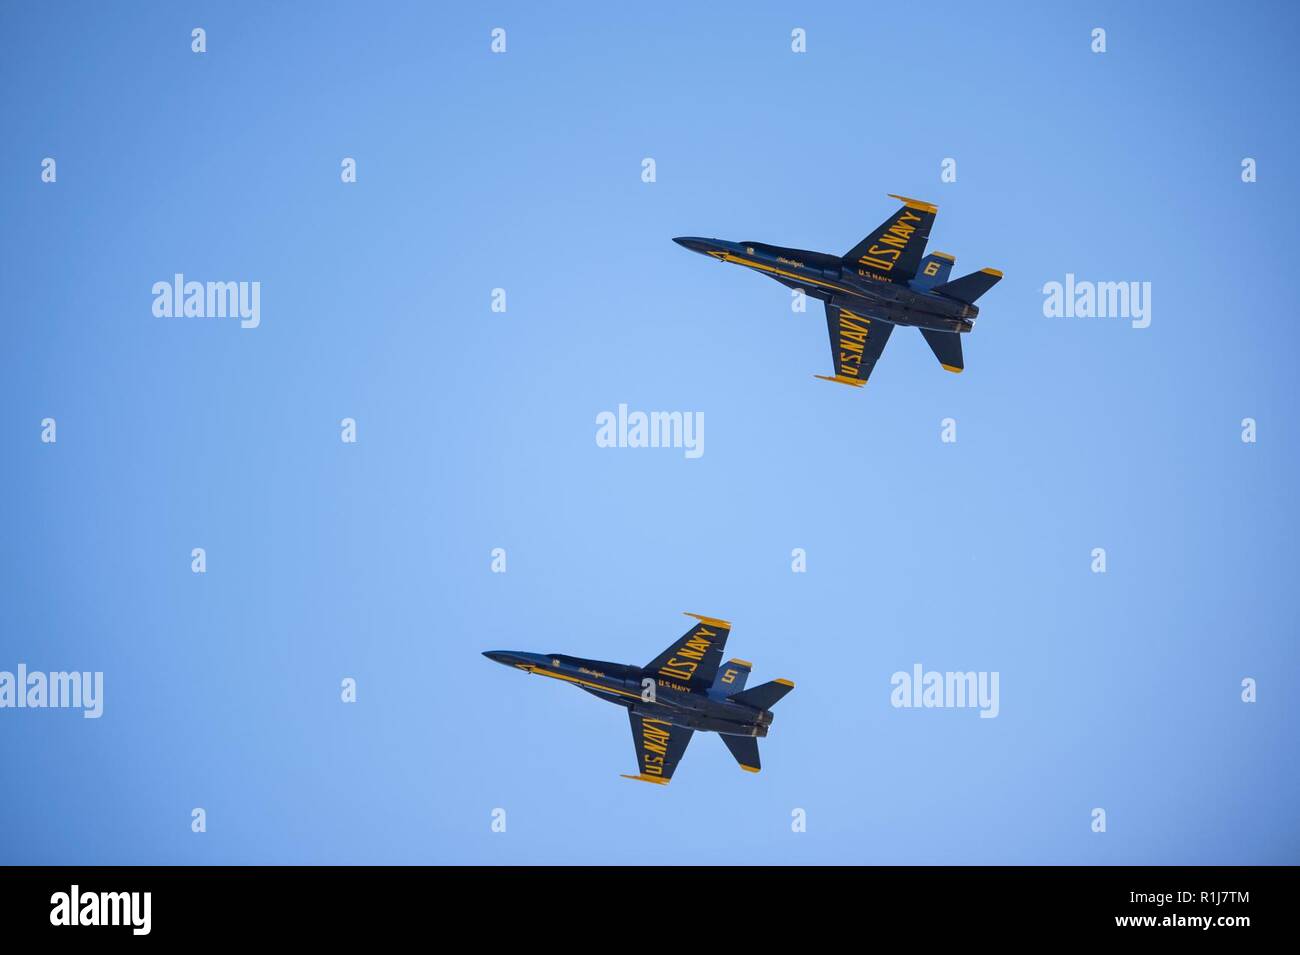 SAN FRANCISCO (Oct. 6, 2018) The U.S. Navy demonstration squadron, the Blue Angels, fly over the amphibious assault ship USS Bonhomme Richard (LHD 6) during San Francisco Fleet Week 2018. San Francisco Fleet Week is an opportunity for the American public to meet their Navy, Marine Corps and Coast Guard teams and experience America’s sea services. During Fleet Week, service members participate in various community service events, showcase capabilities and equipment to the community, and enjoy the hospitality of San Francisco and its surrounding areas. Stock Photo